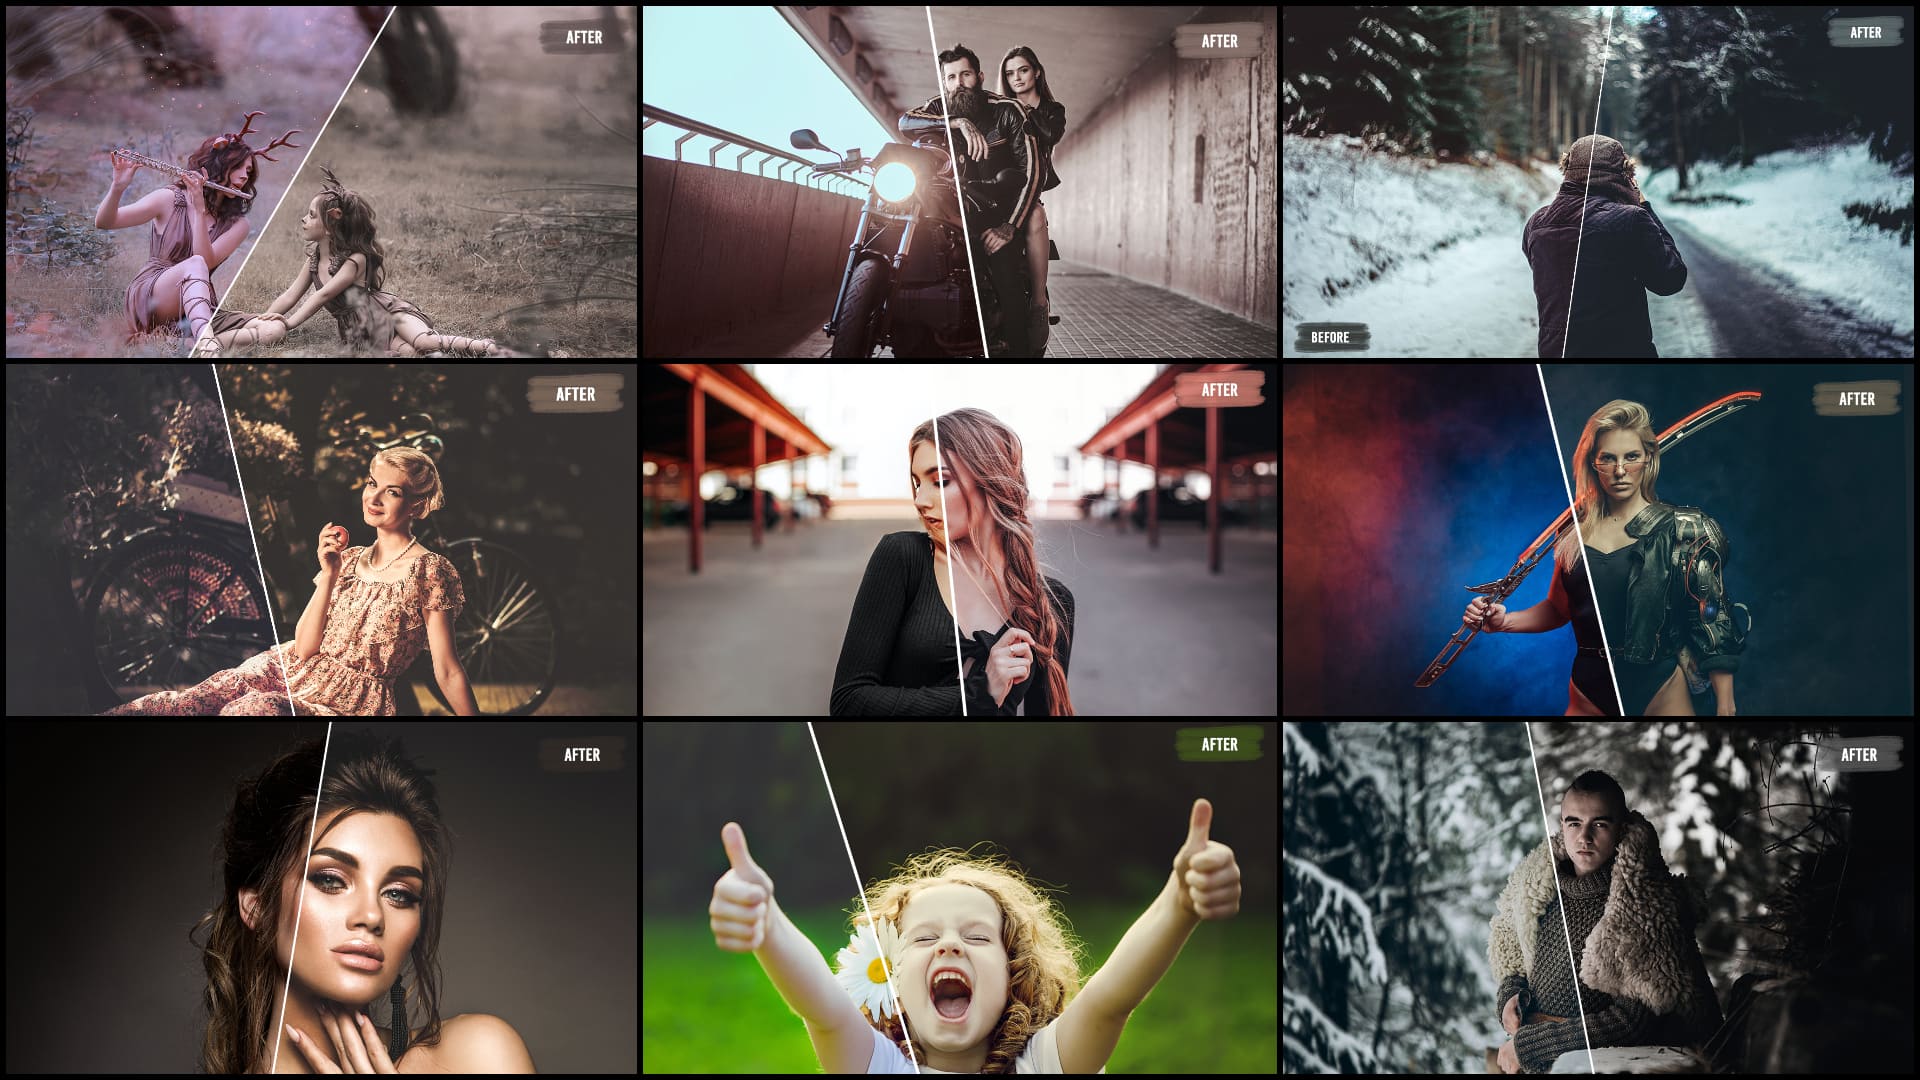 Cool collage with some examples of photos with this preset.